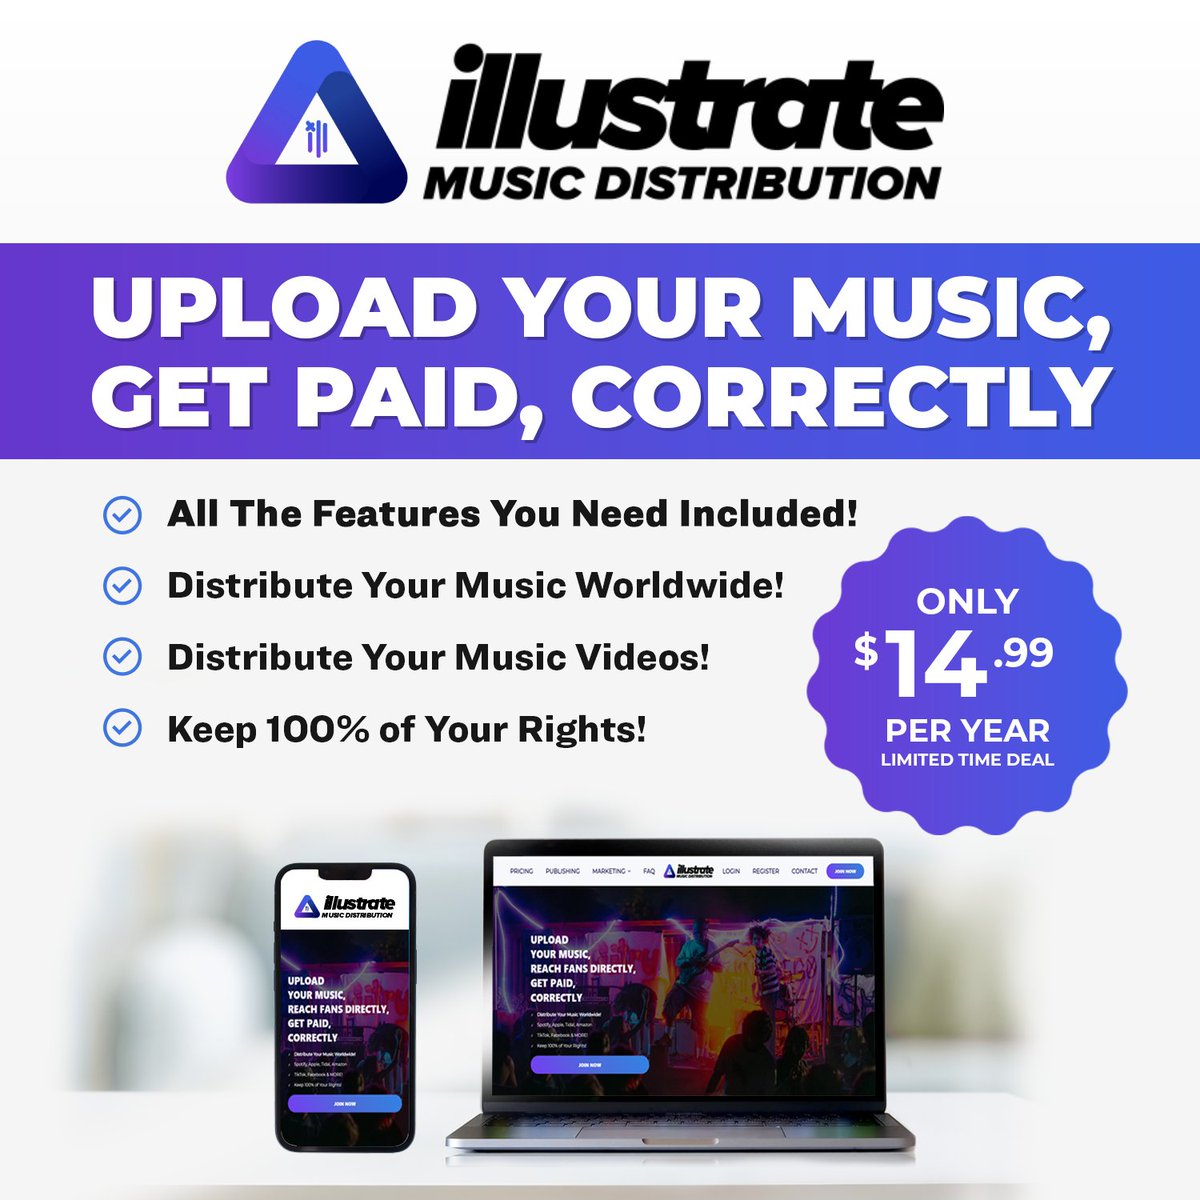 This offer ends soon! Unbeatable music distribution deal, just before 2024! Lock in a full year for $14.99 before the price increases! Lock in NOW at $14.99 👉🏼 vist.ly/rbqk #MusicDistribution #Music #Spotify #AppleMusic #IllustrateMusic